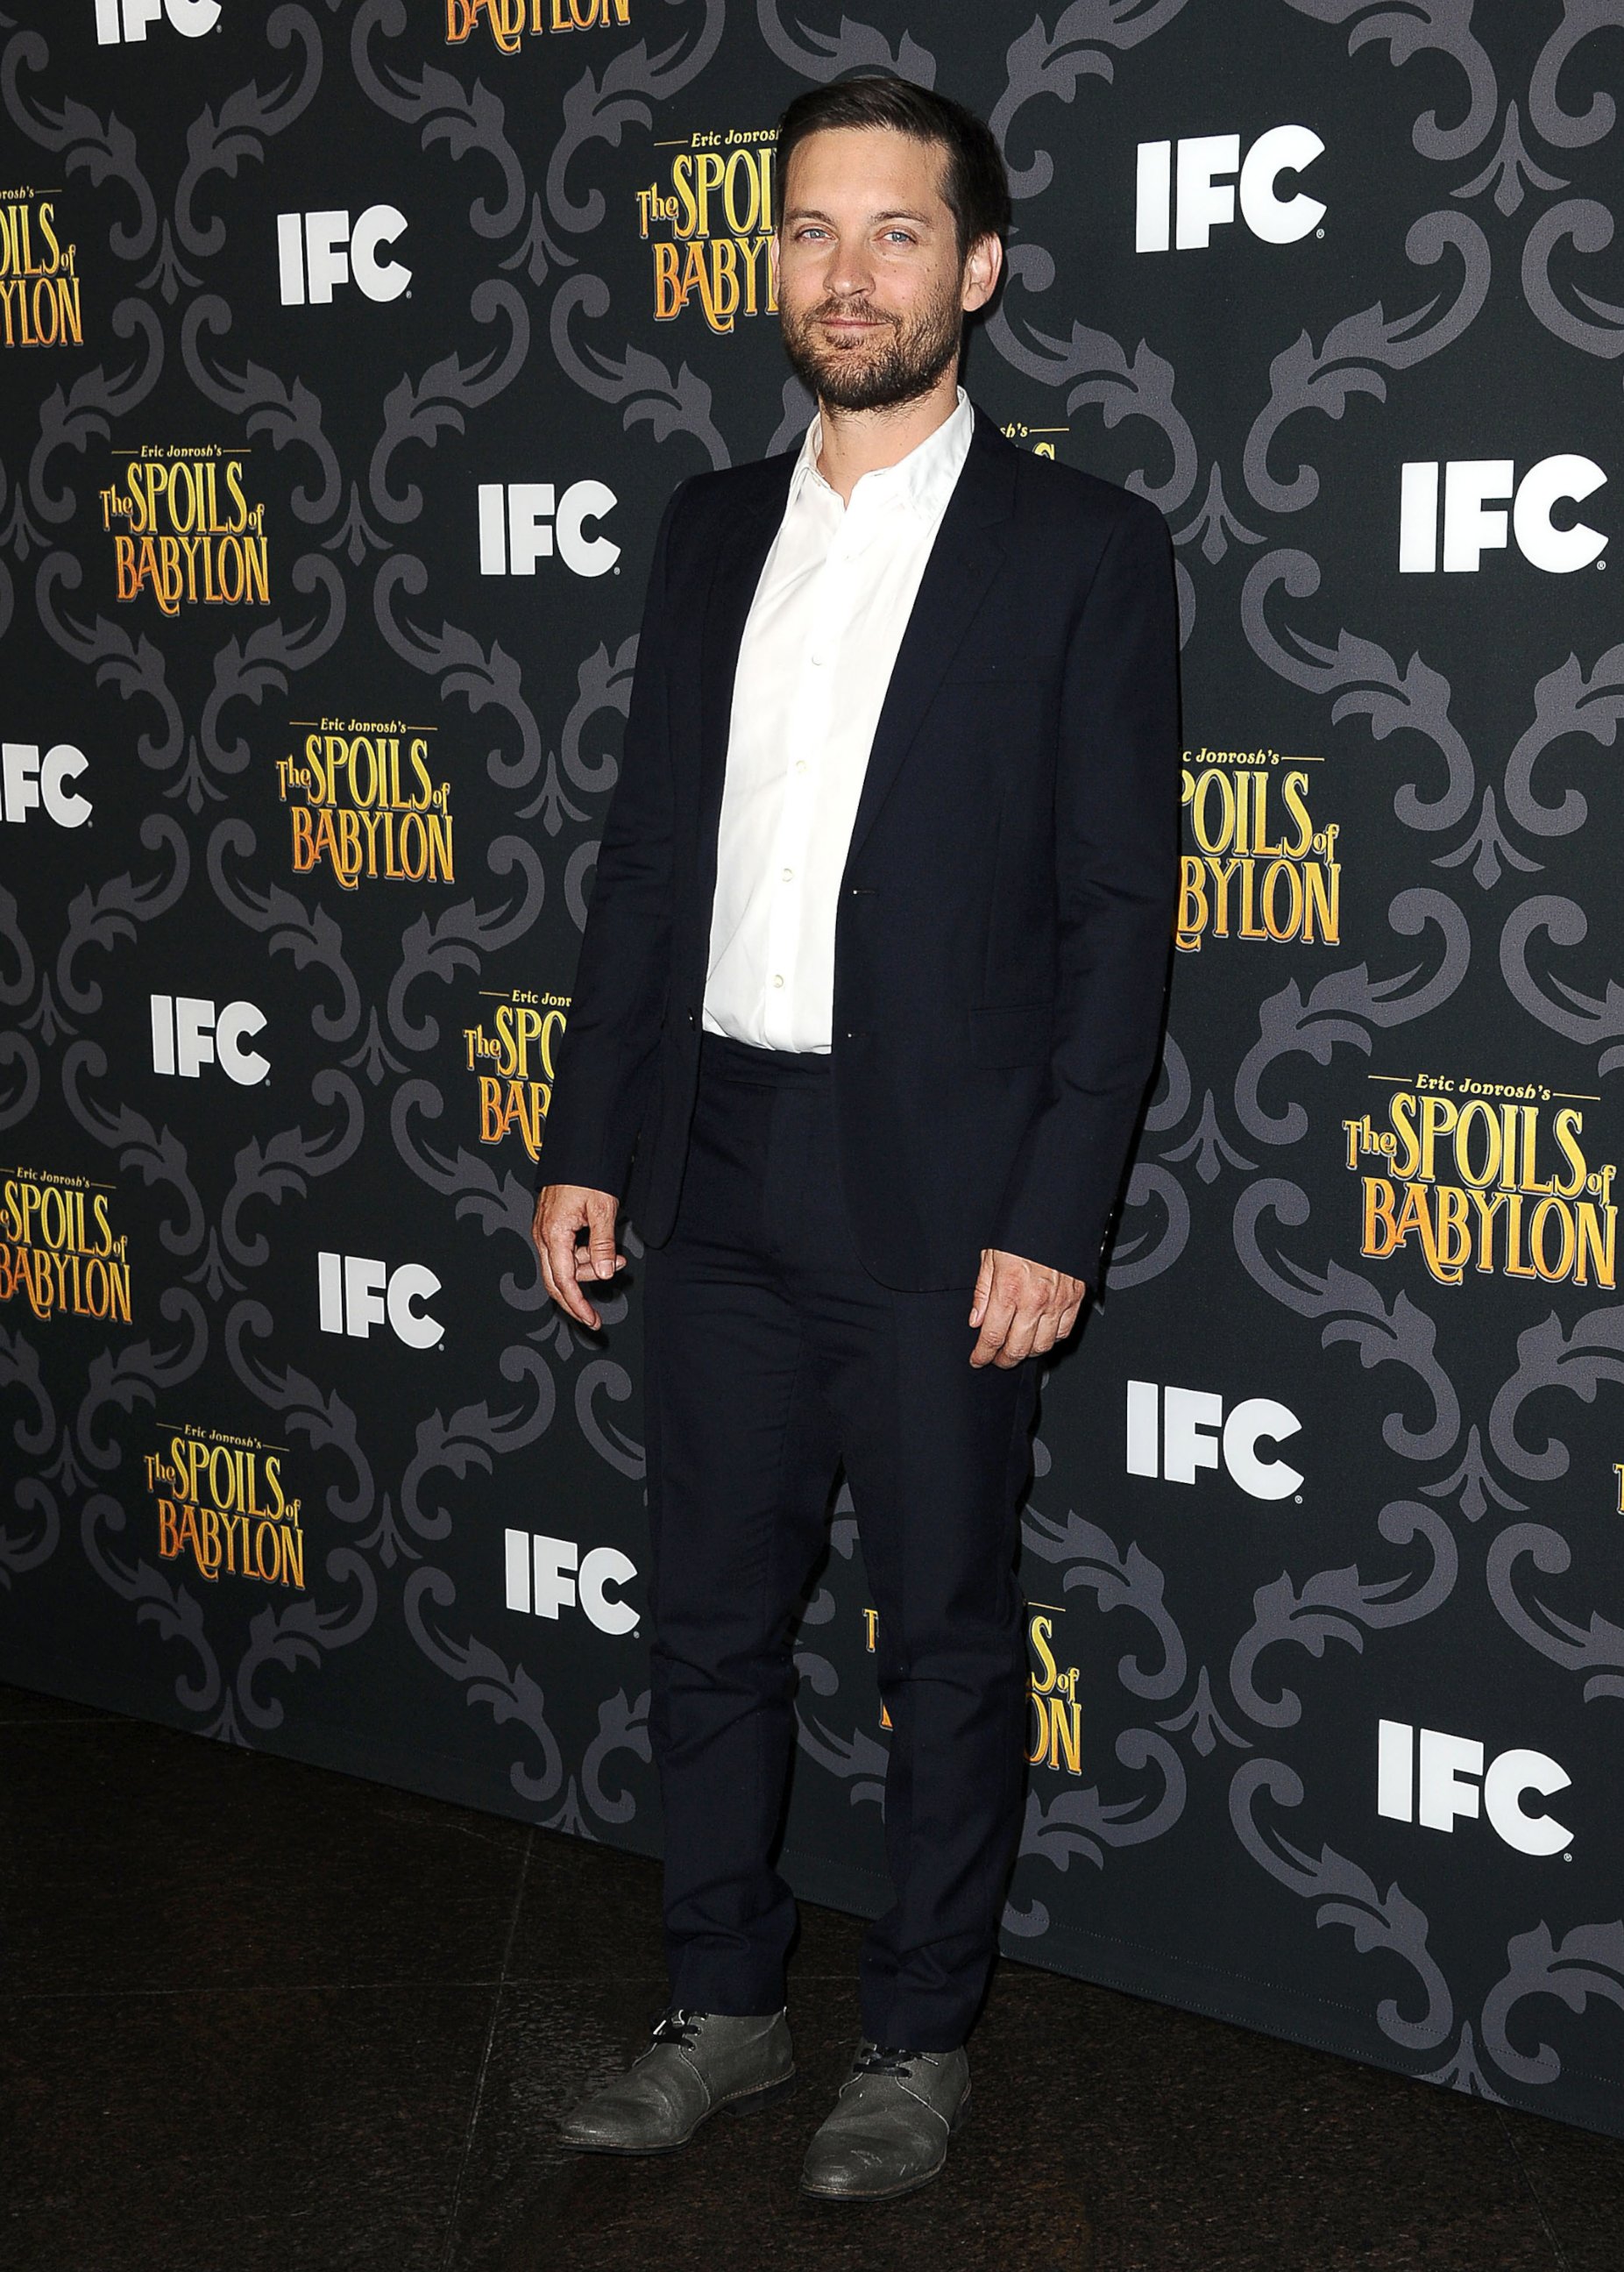 PHOTO: Actor Tobey Maguire attends the premiere of IFC's "The Spoils Of Babylon" at DGA Theater in this Jan. 7, 2014, file photo in Los Angeles, Calif.